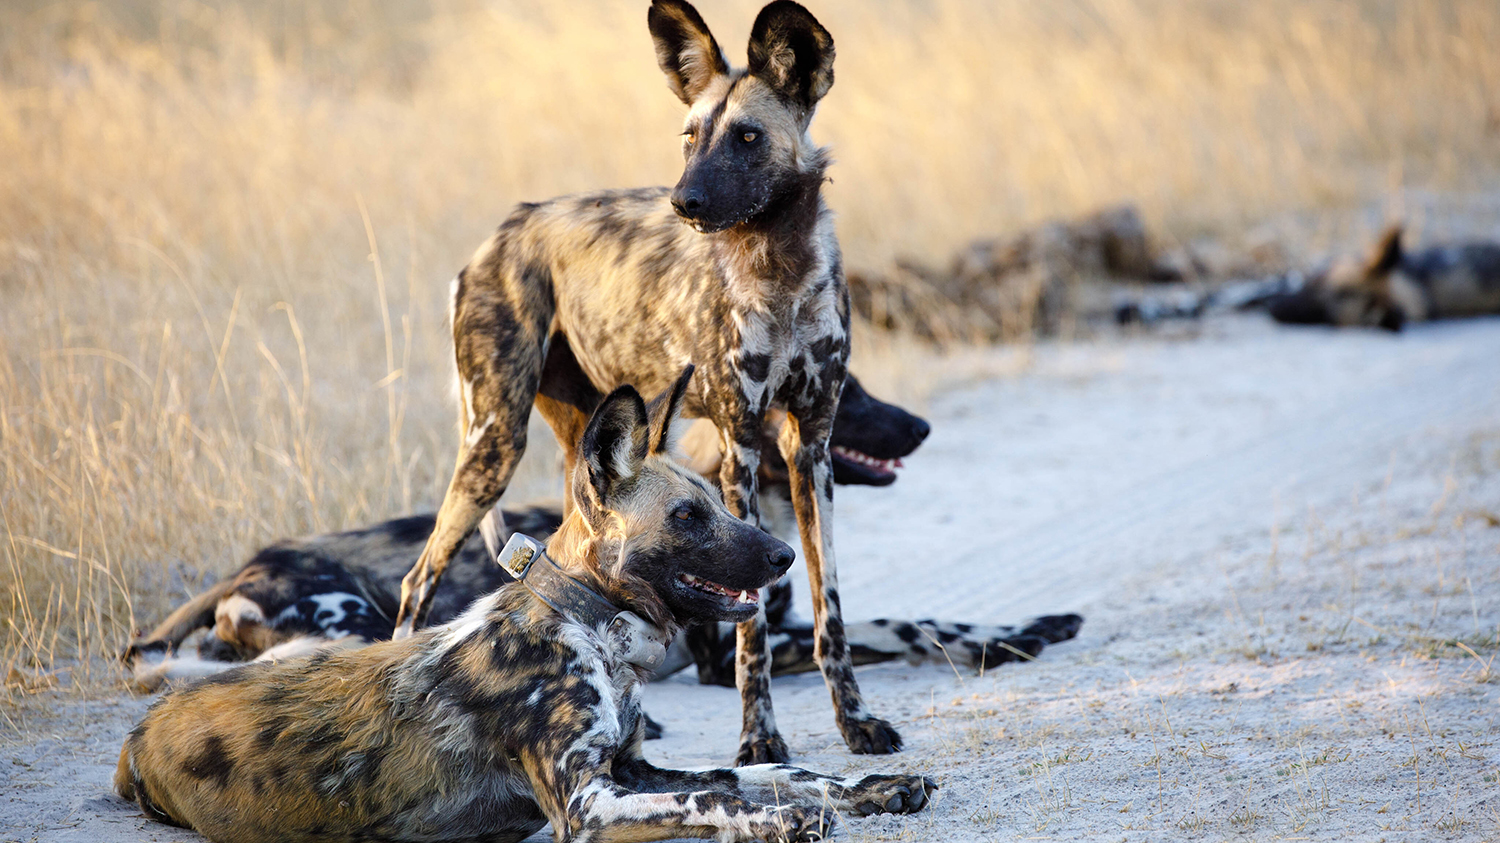 African wild dogs in the Moremi Game Reserve in northern Botswana. The animal in front has a GPS collar that records the distance travelled during migration. (Image: Arpat Ozgul/UZH))